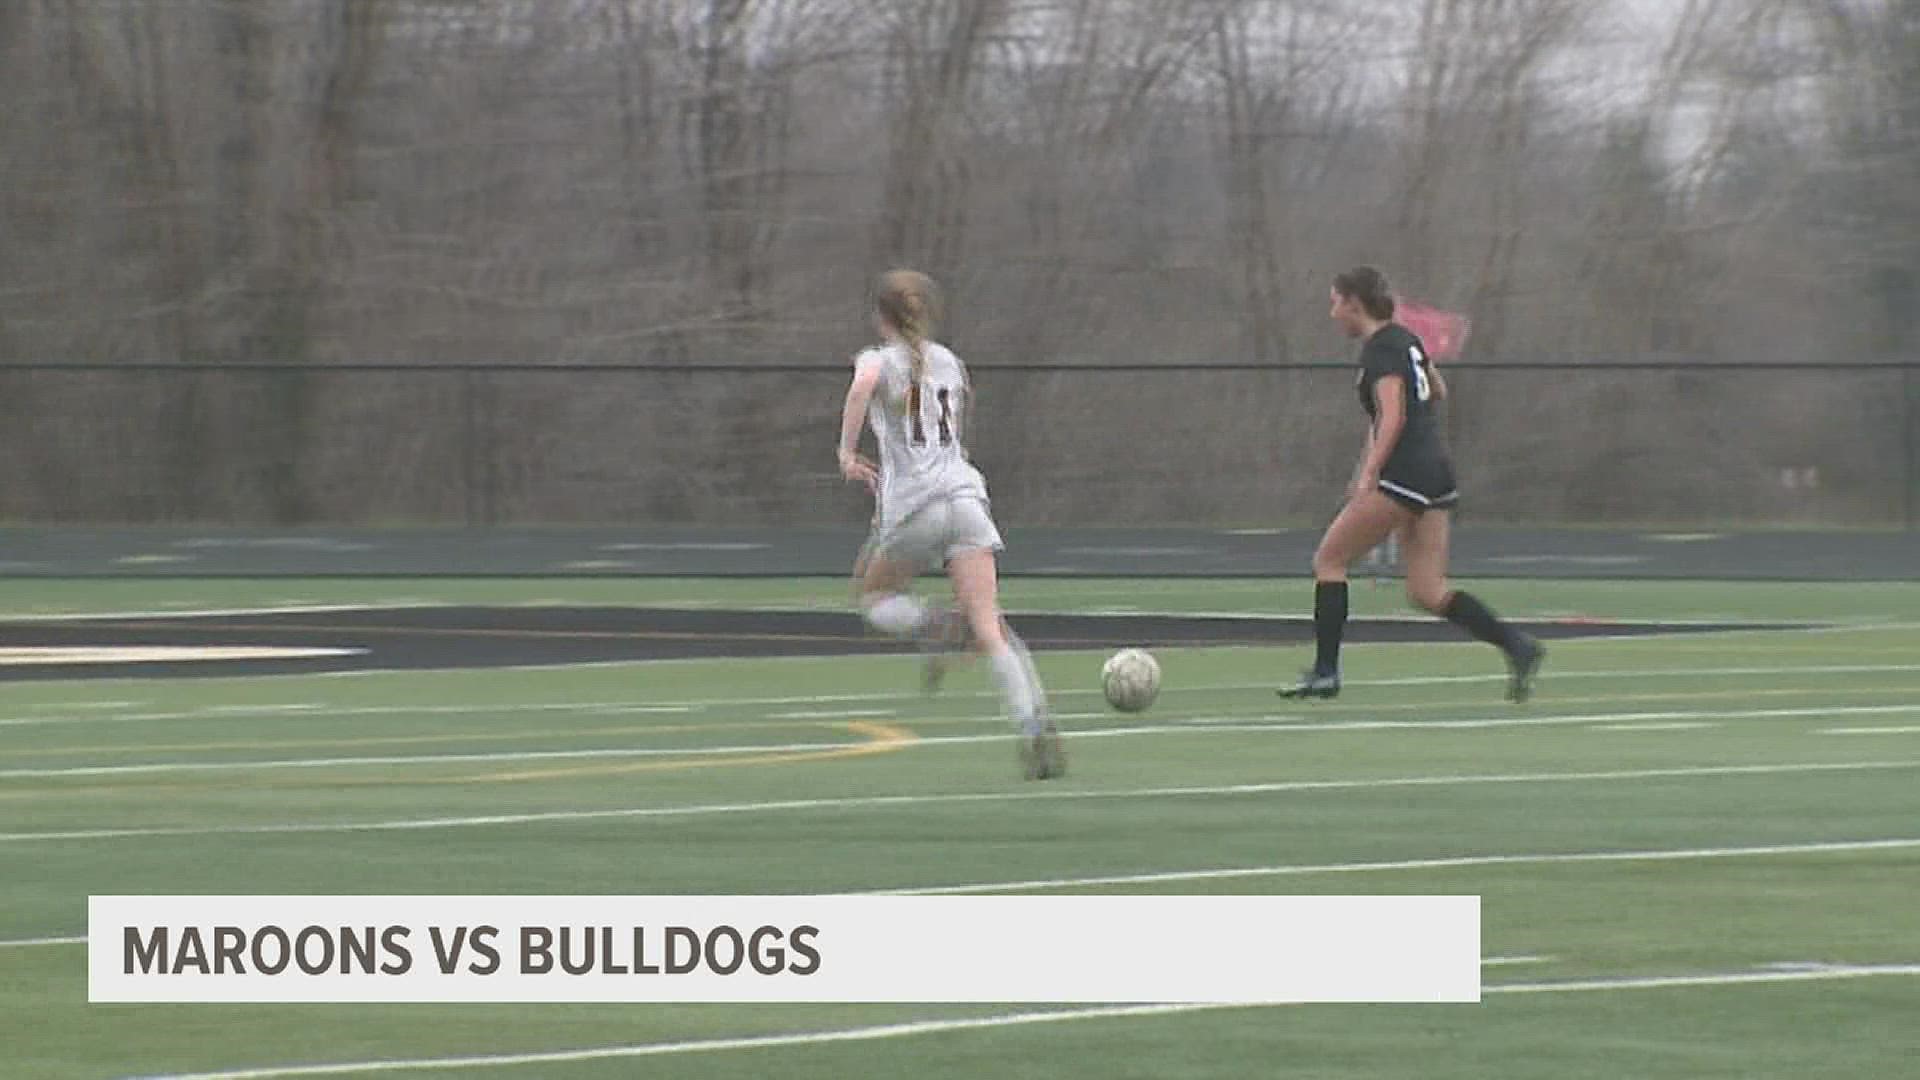 The Bulldogs protected home field with a 4-1 win over the Maroons on Friday.